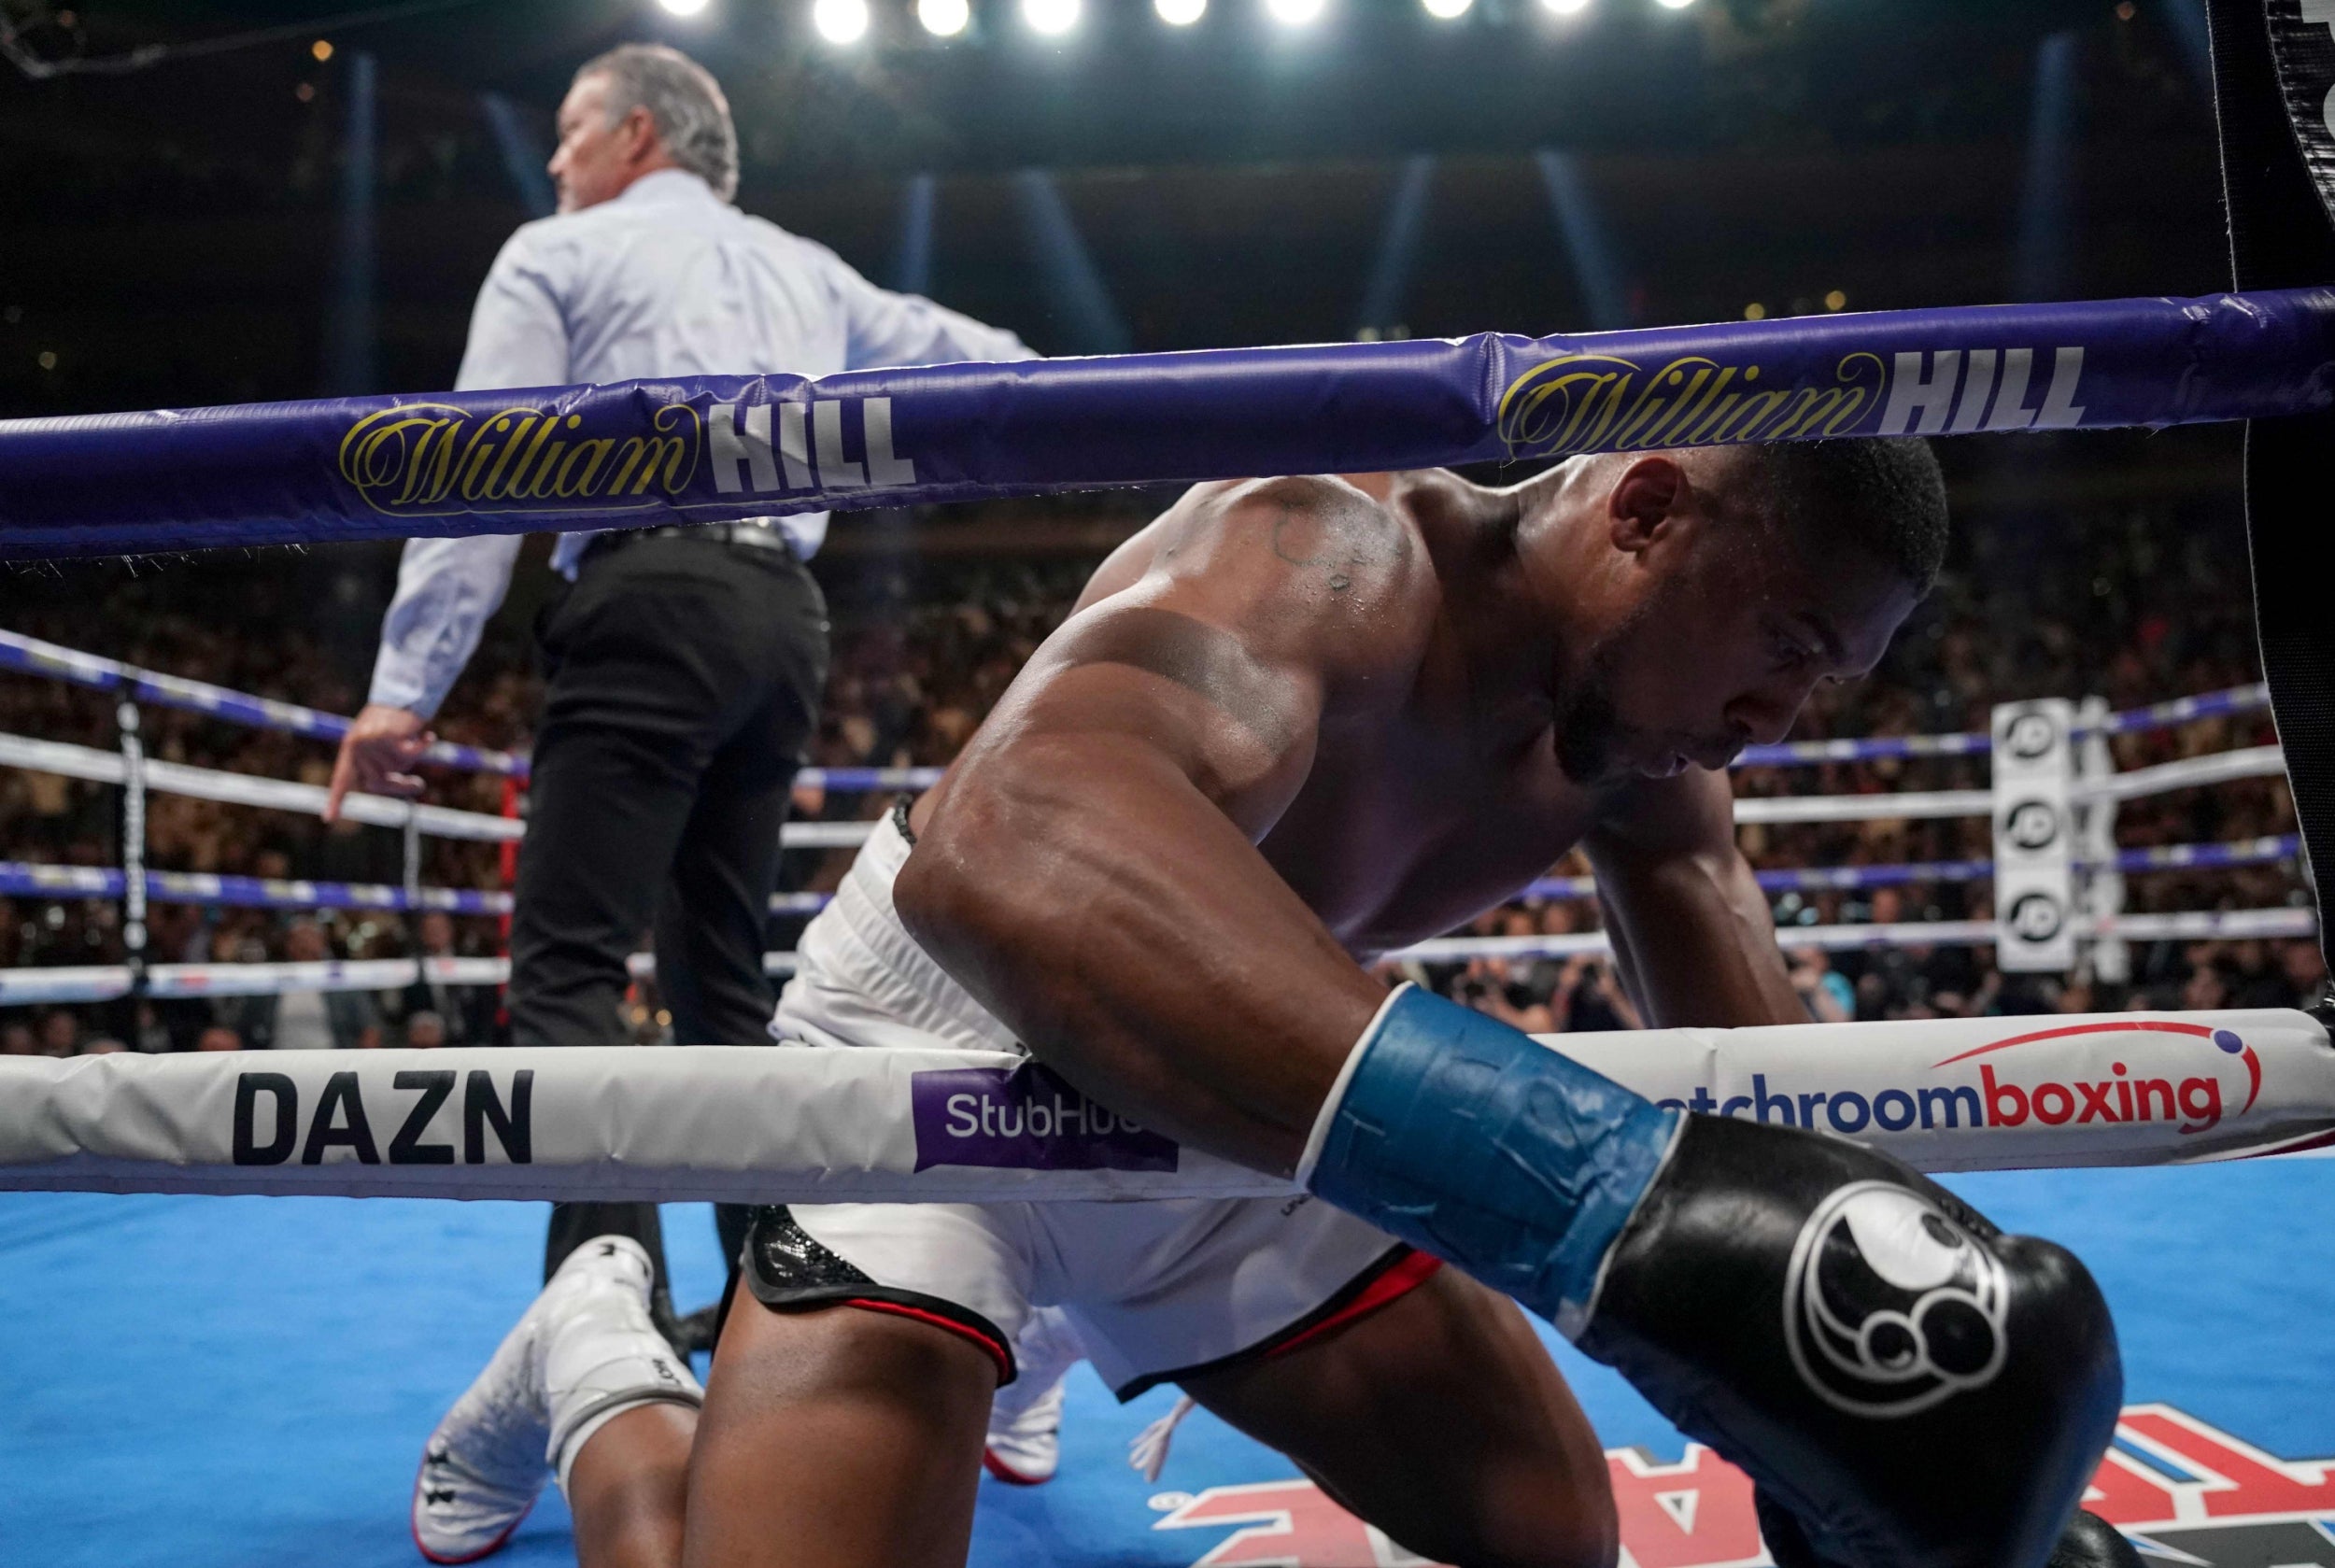 Joshua is knocked down by Ruiz in their bout at Madison Square Garden (AFP/Getty)